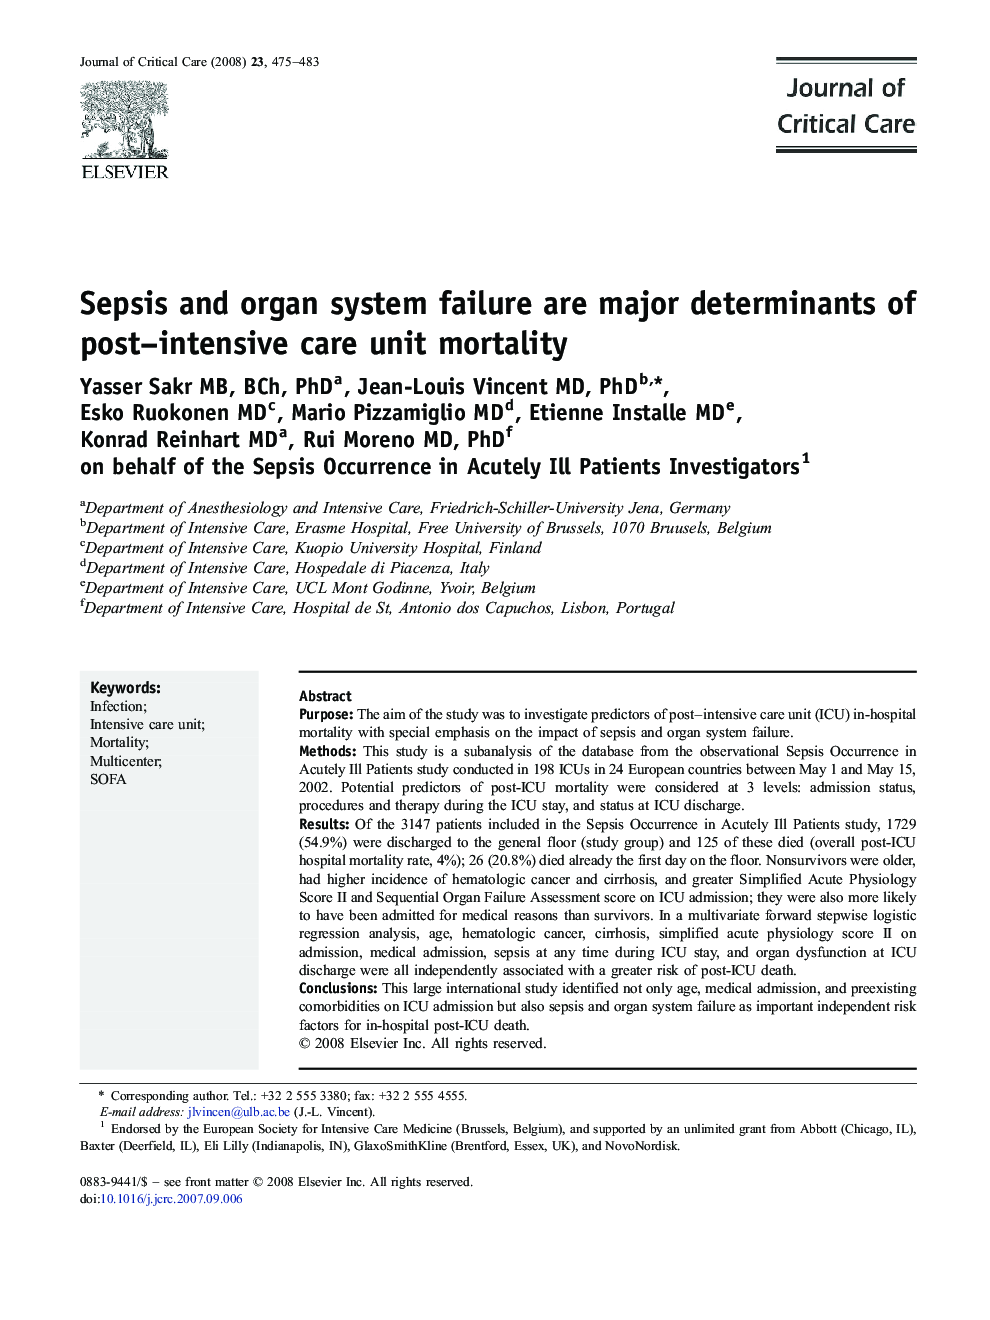 Sepsis and organ system failure are major determinants of post–intensive care unit mortality